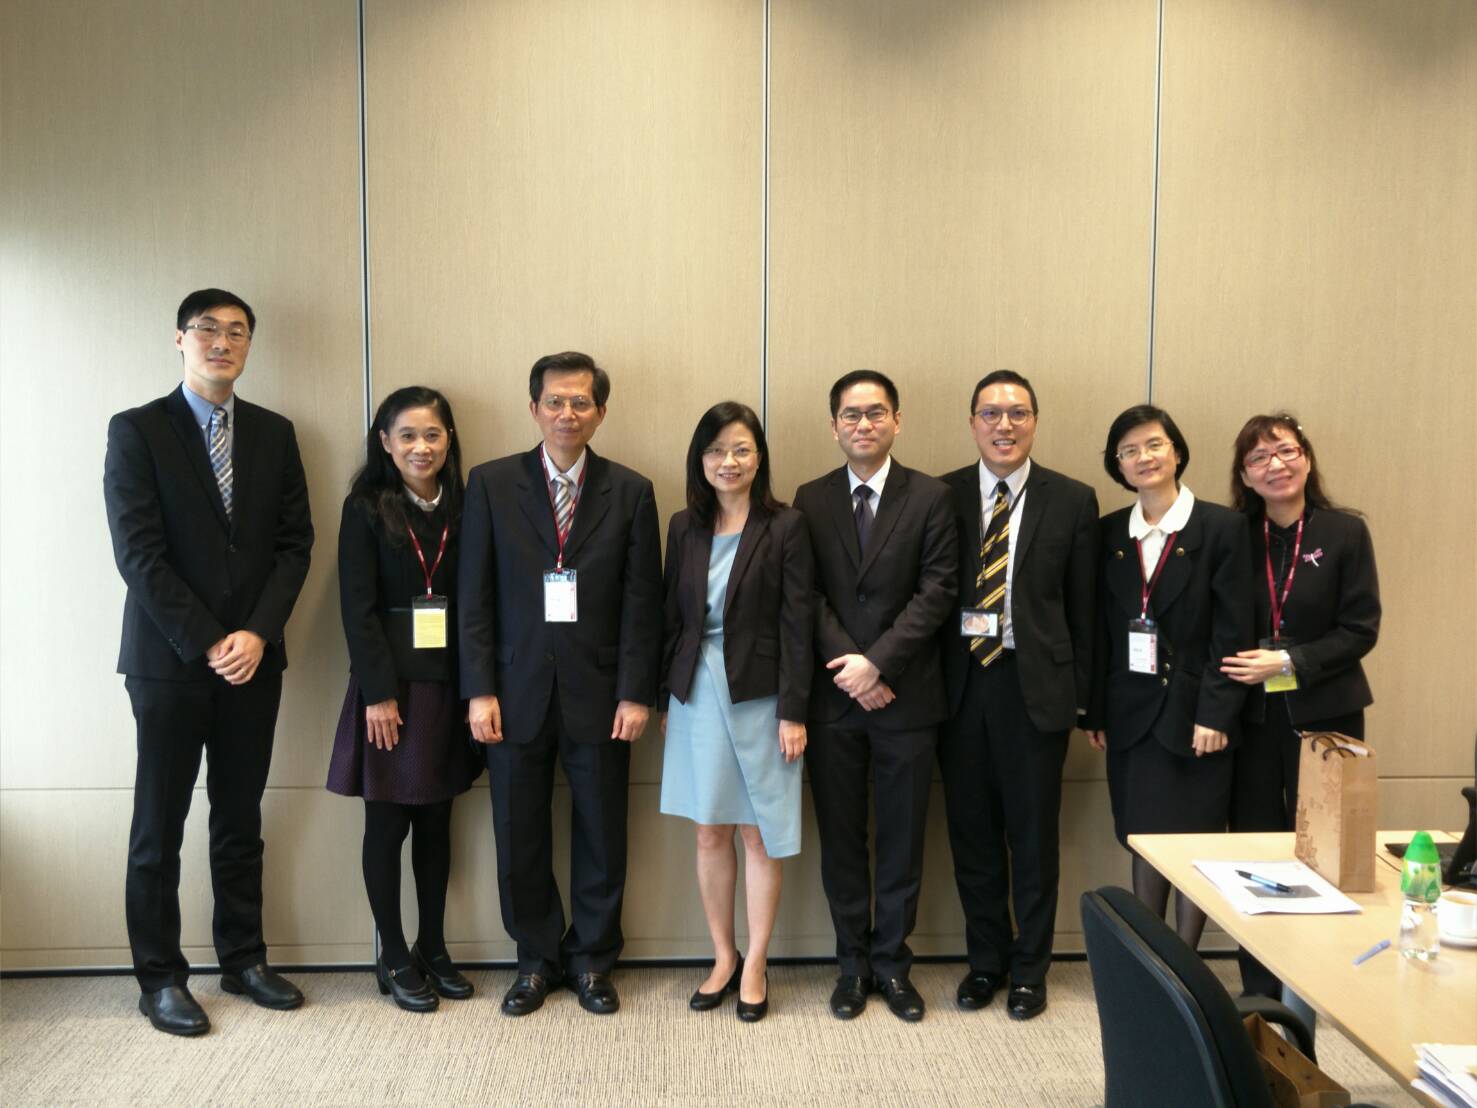 Group Photo: CDIC EVP Mr. William Su (3rd from the left) and HKDPB Deputy CEO Ms. Anita Chan (4th from the left) and other staffs from the CDIC and HKDPB. 